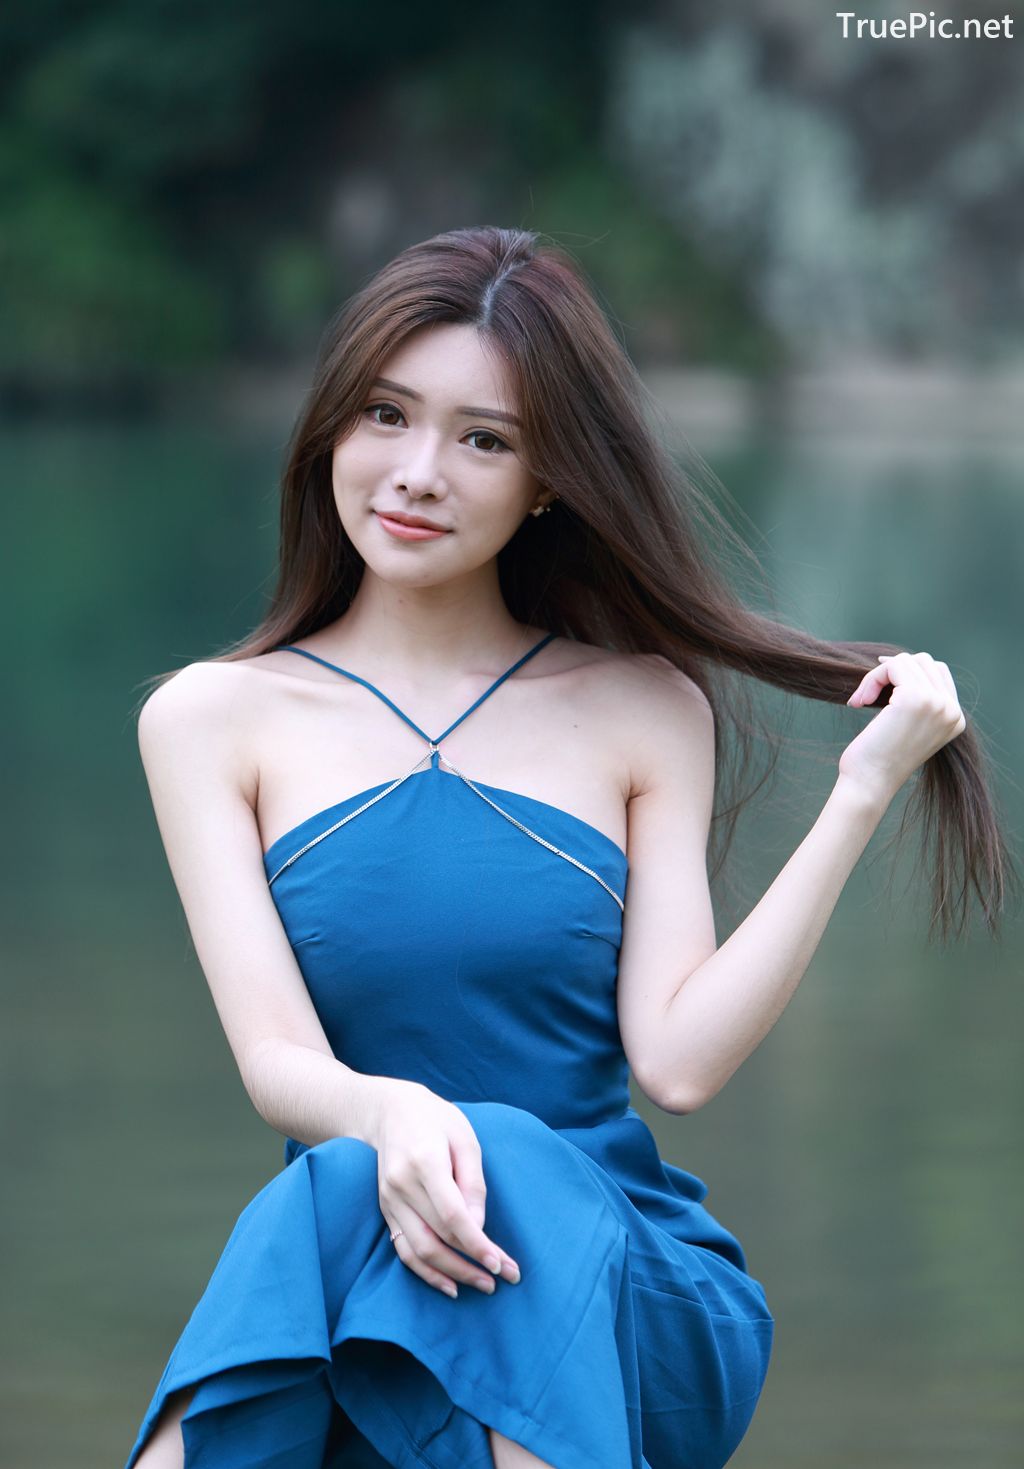 Image-Taiwanese-Pure-Girl-承容-Young-Beautiful-And-Lovely-TruePic.net- Picture-80